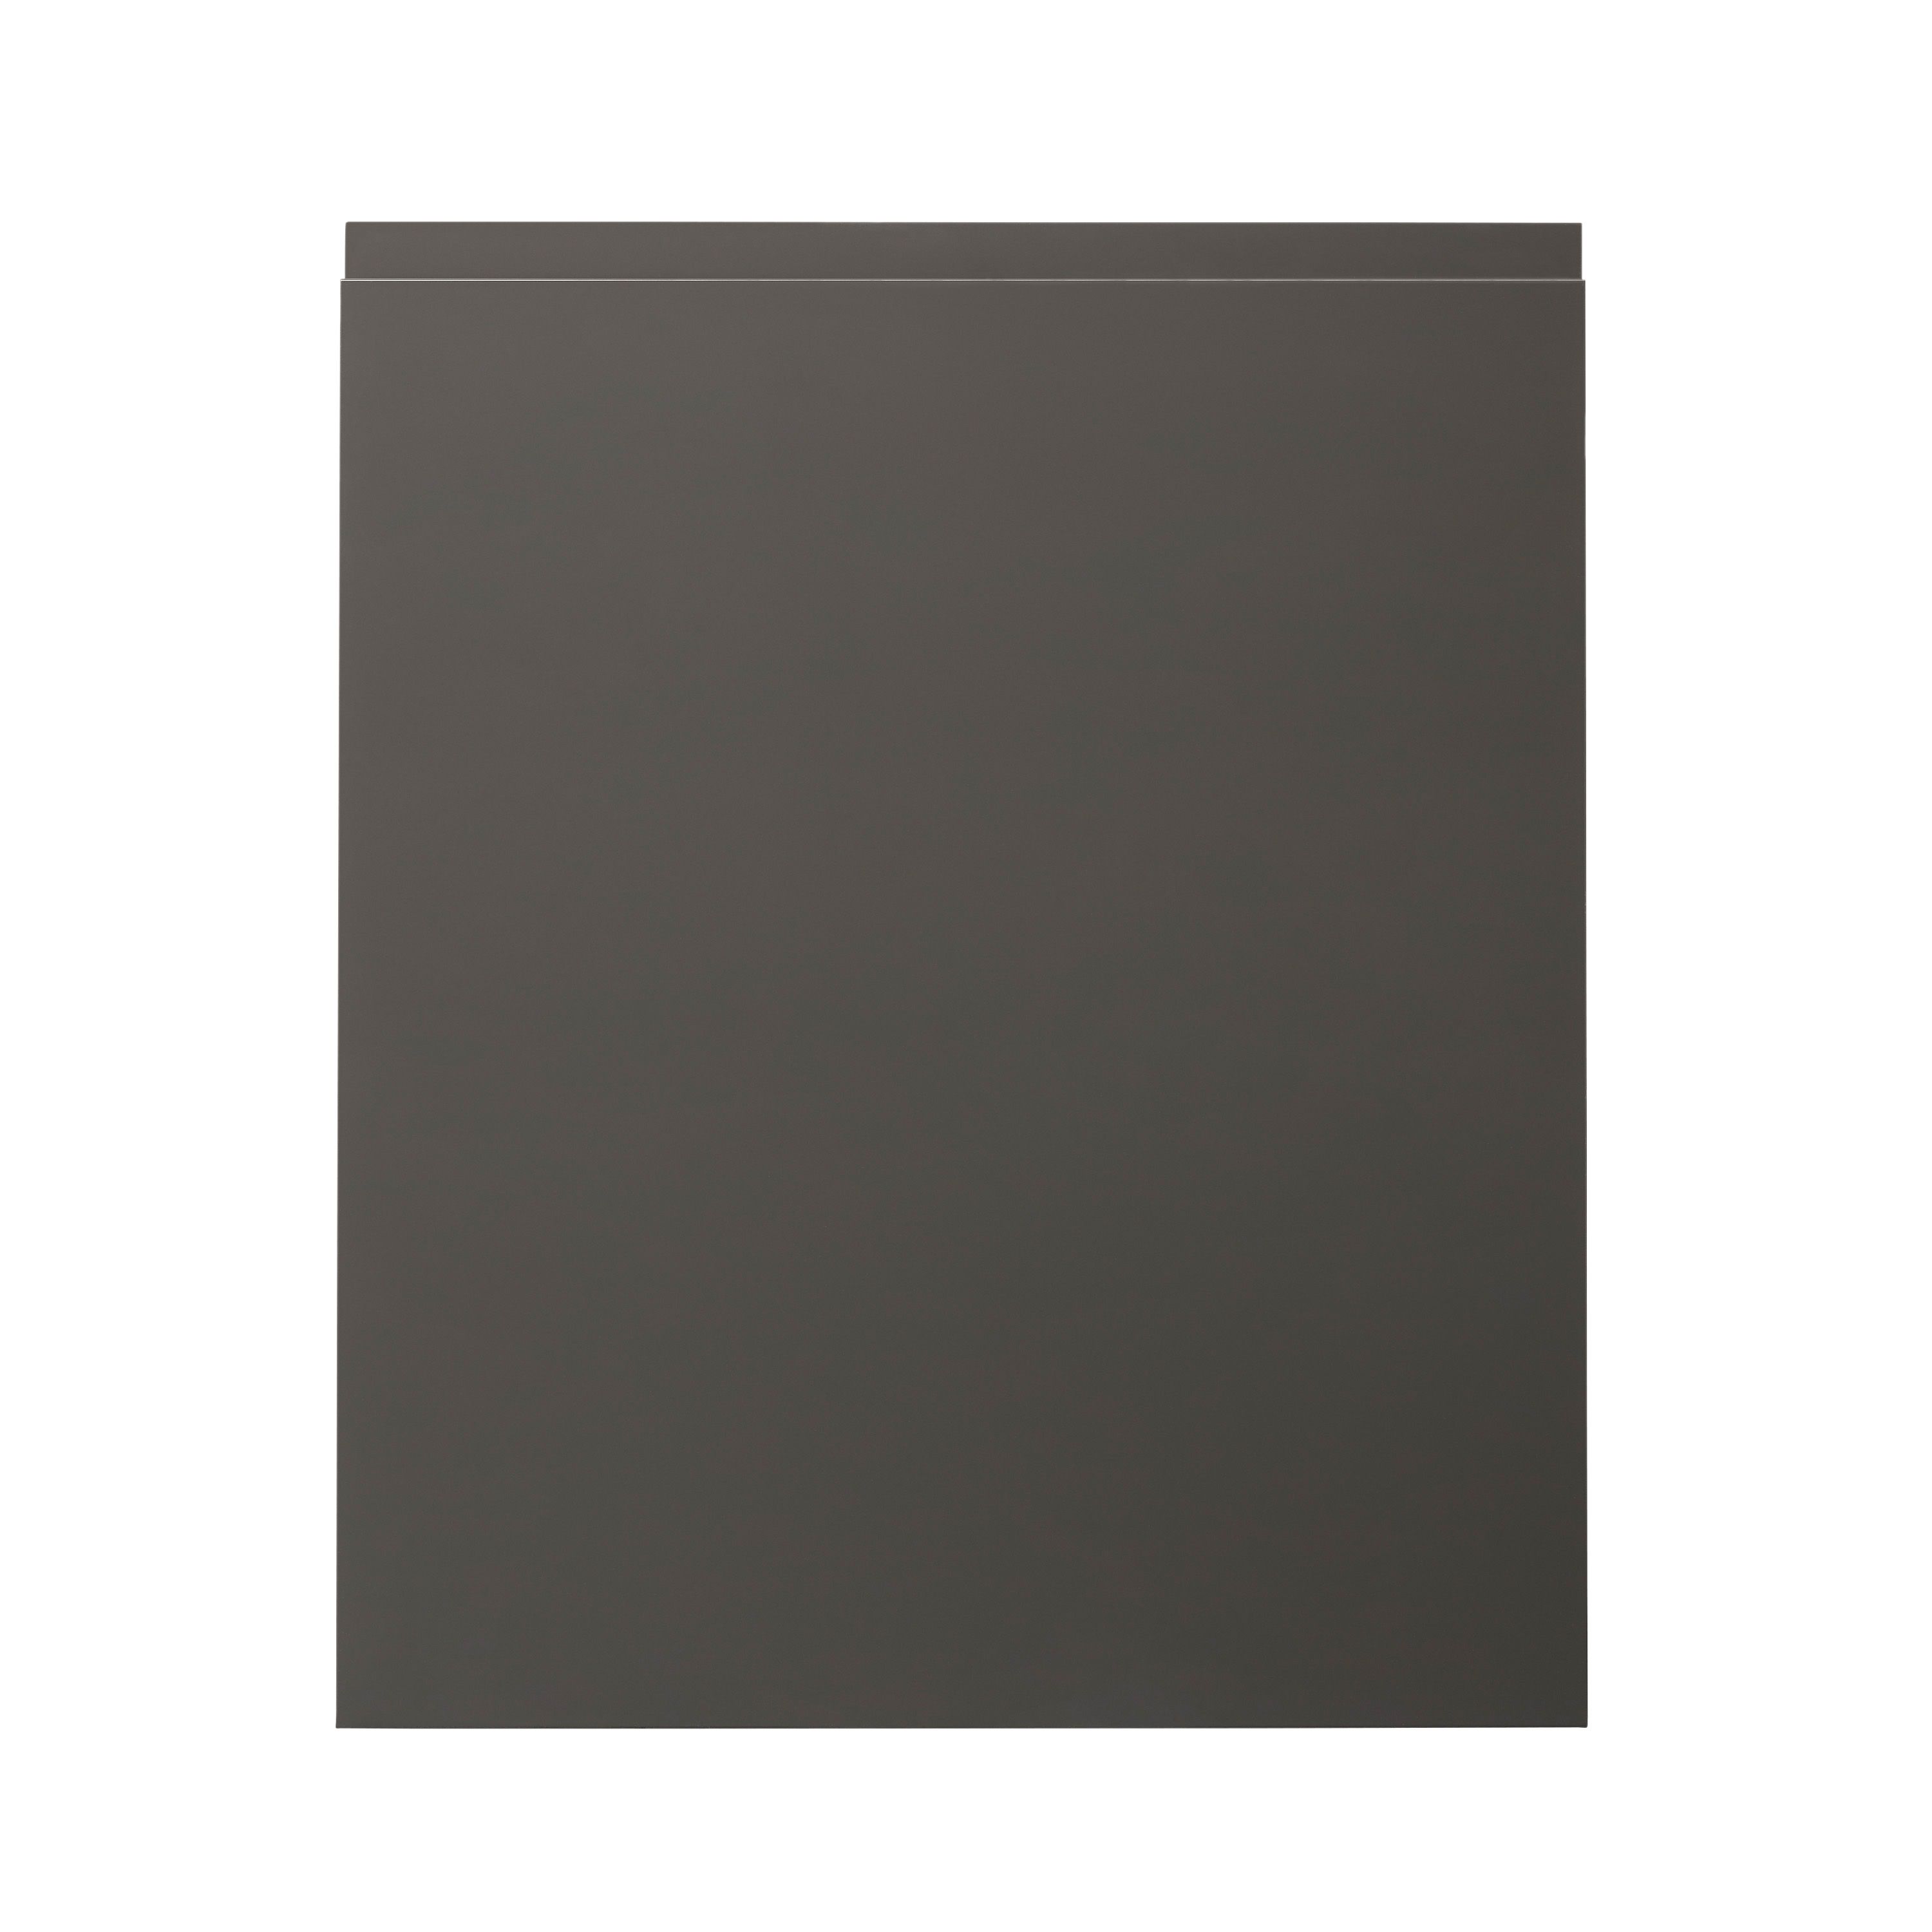 GoodHome Garcinia Gloss anthracite integrated handle Tall appliance Cabinet door (W)600mm (H)723mm (T)19mm